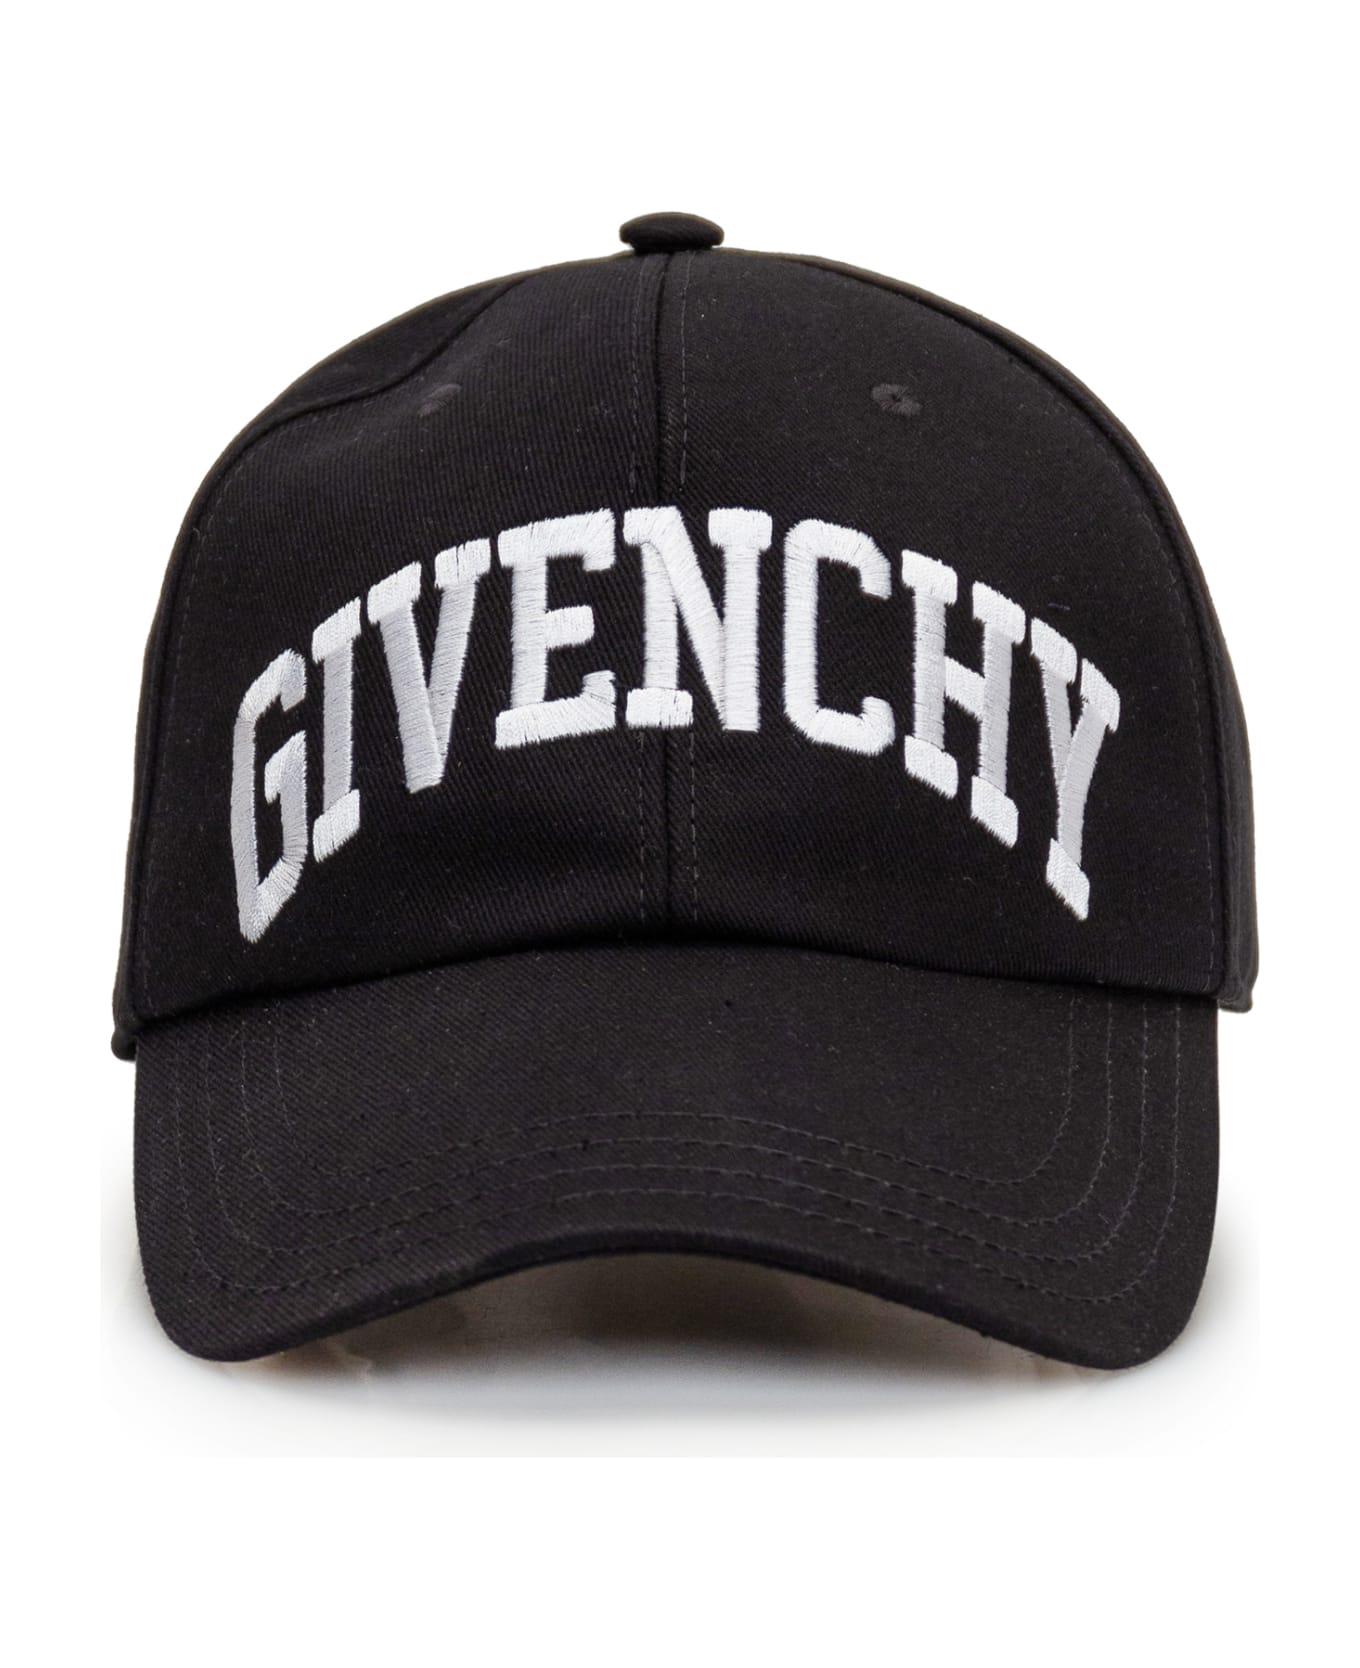 Givenchy Black Baseball Flat hat With Givenchy College Embroidery - Black